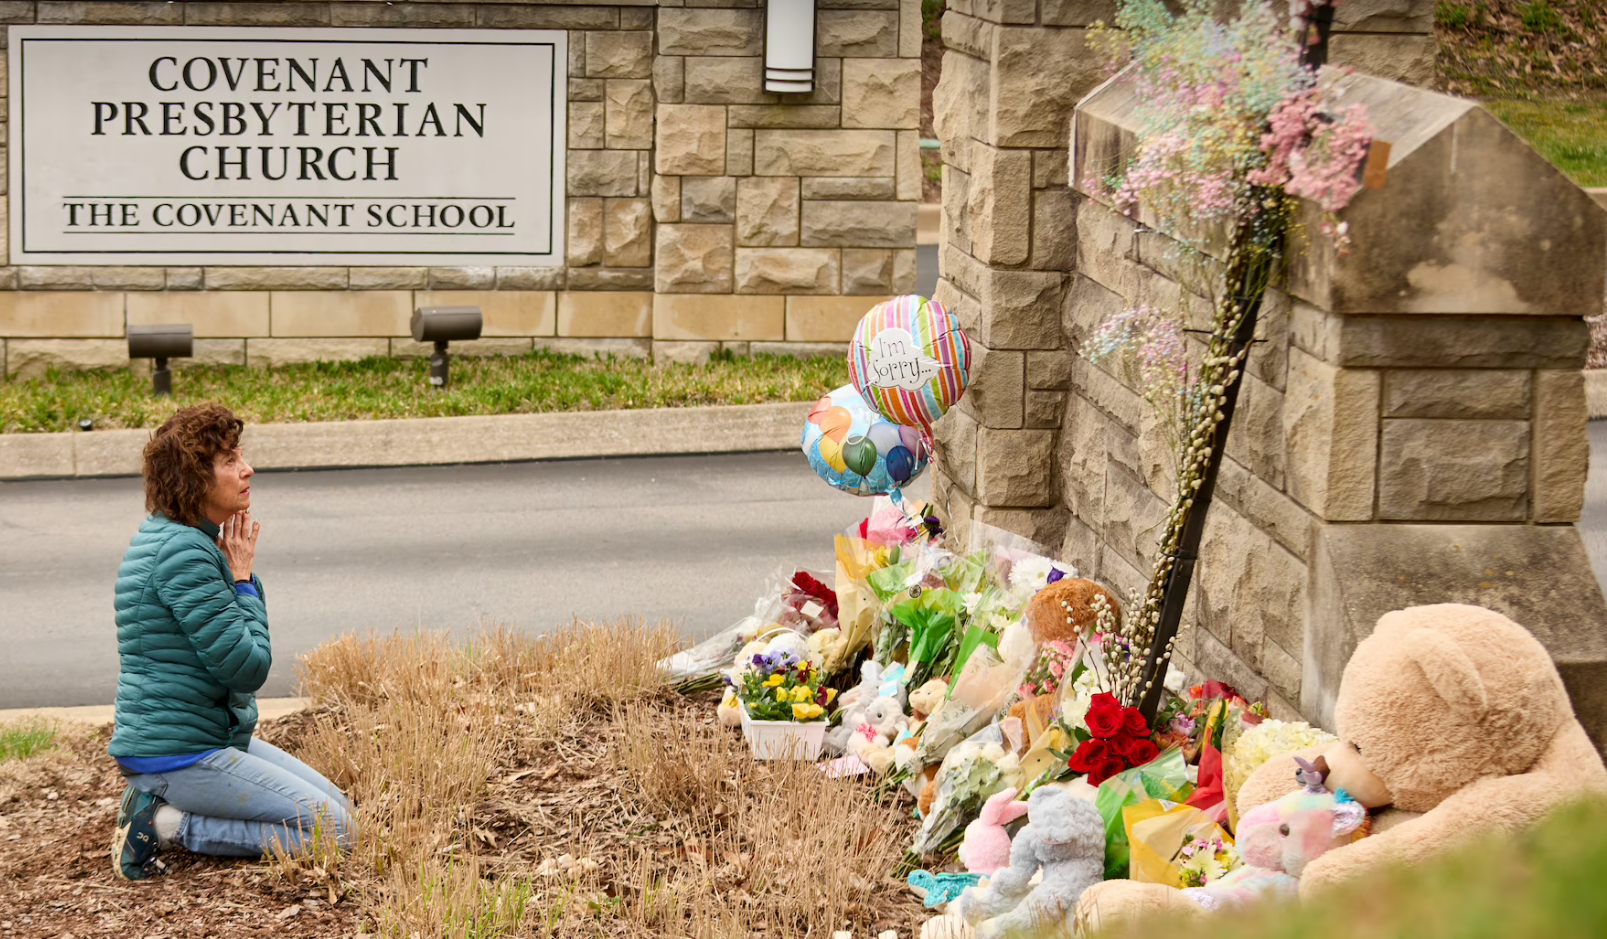 Woman kneeling and praying at the makeshift shrine for the victims of the Covenant School shooting, Nashville TN